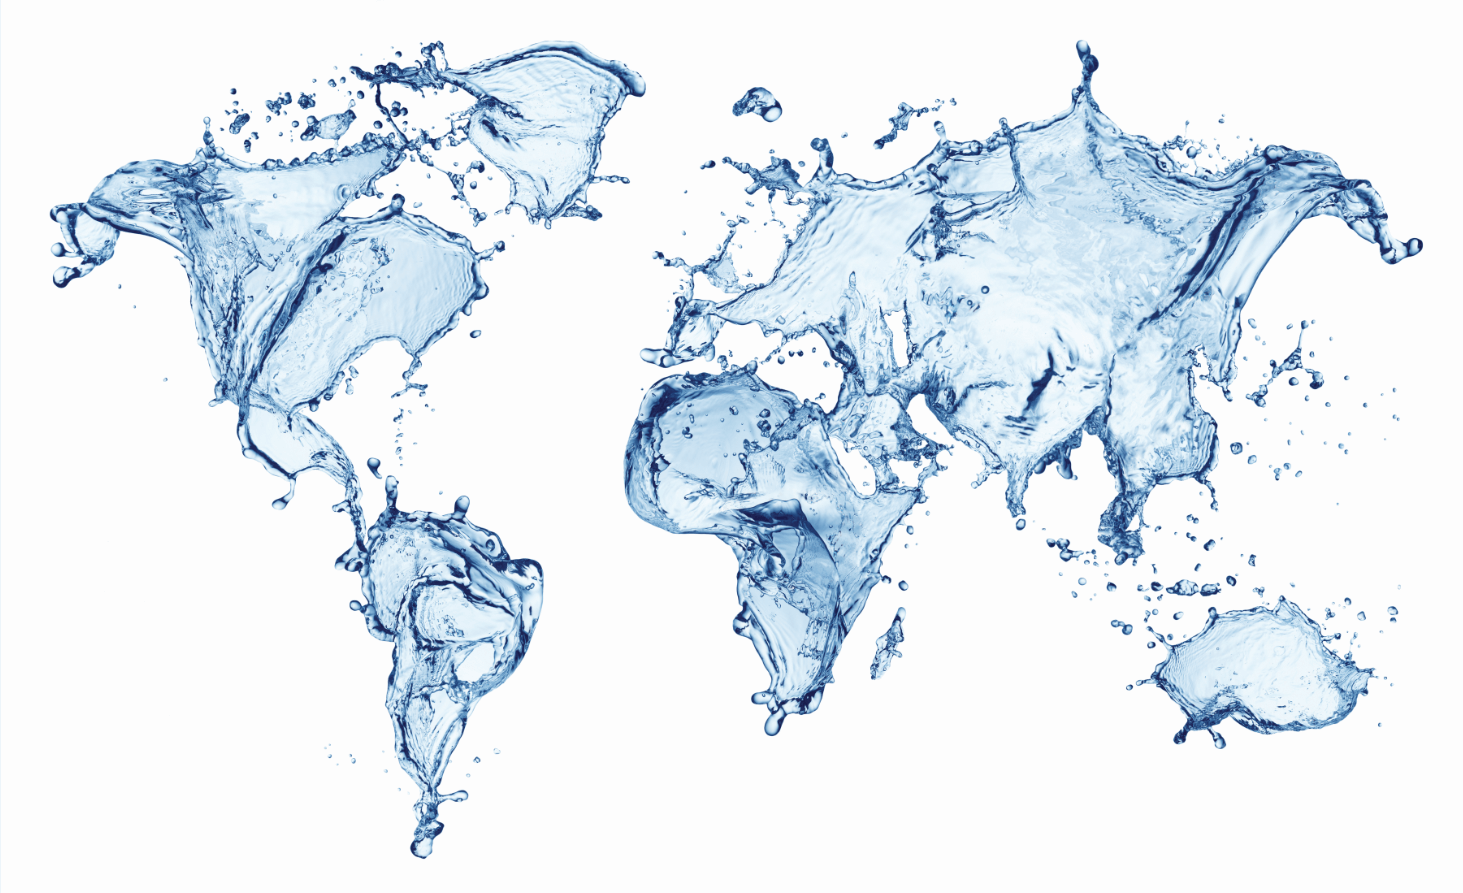 World Water Day 2024: Water for Peace